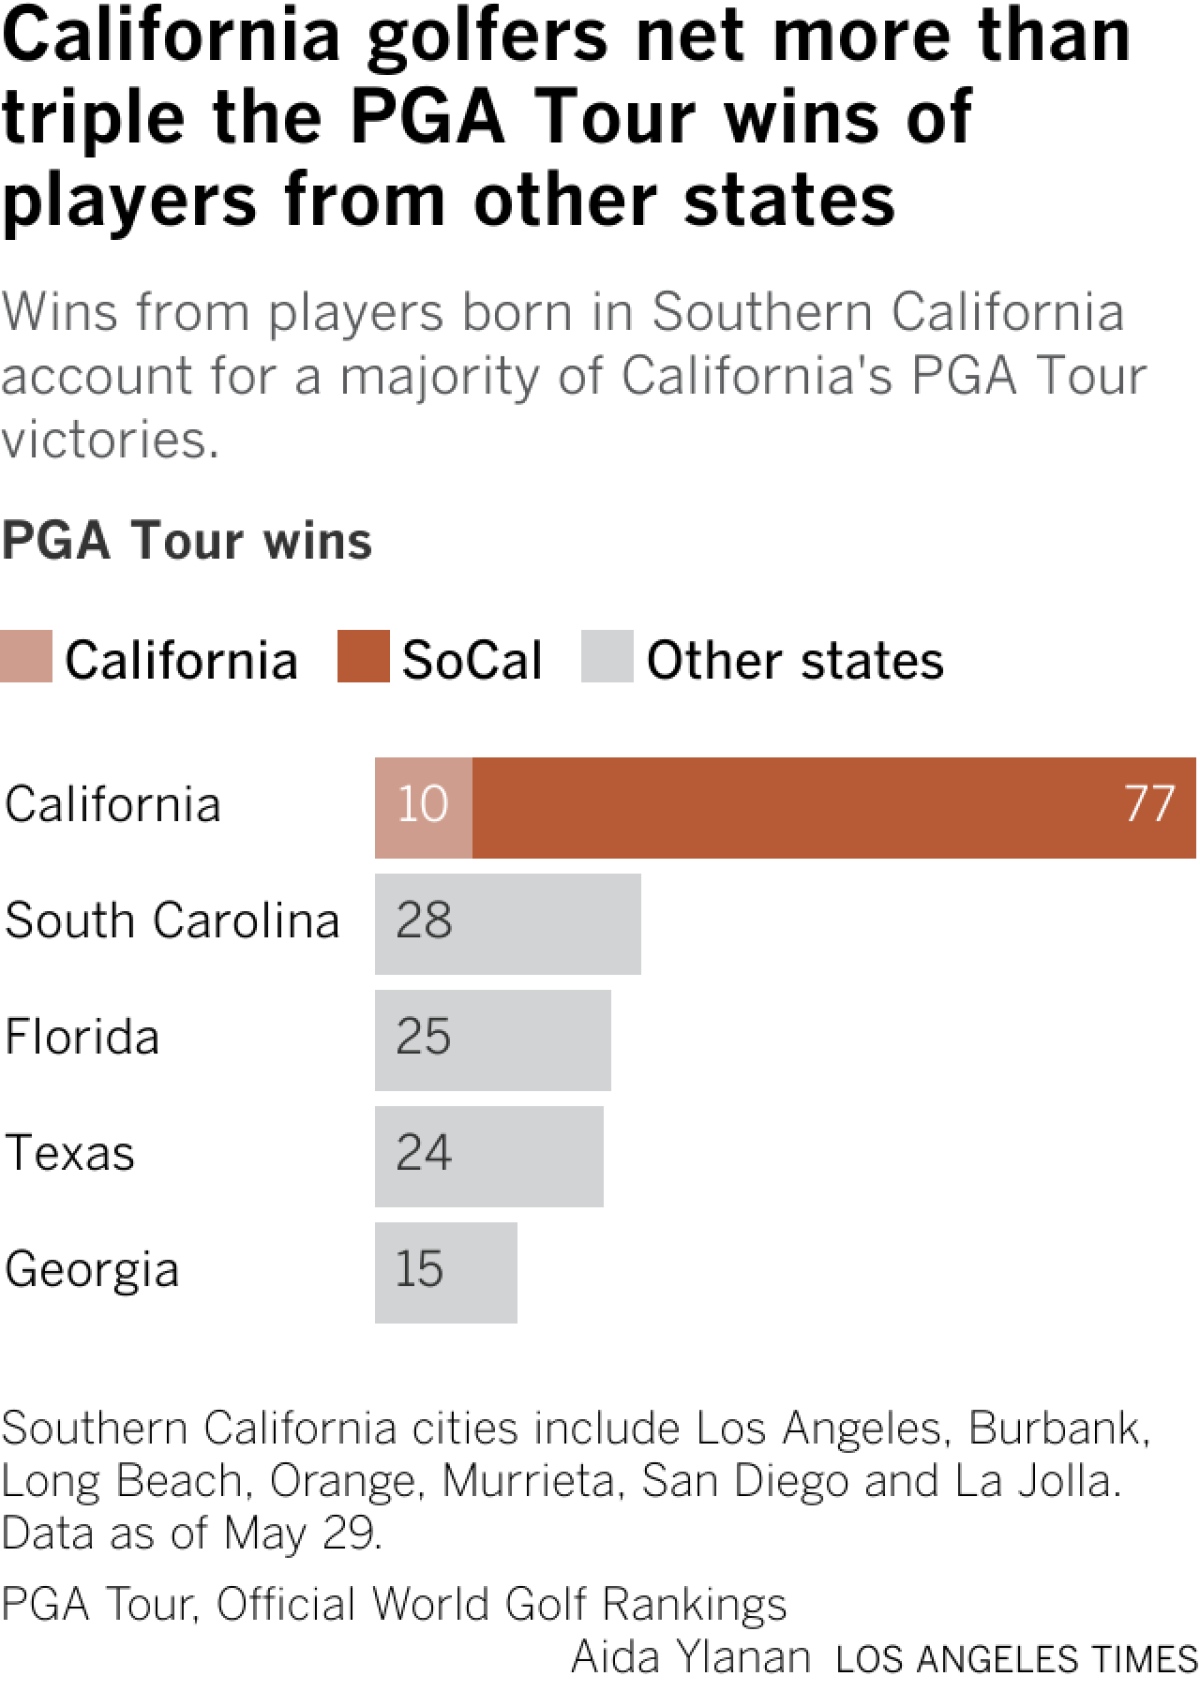 Wins from players born in Southern California account for a majority of California's PGA Tour victories.